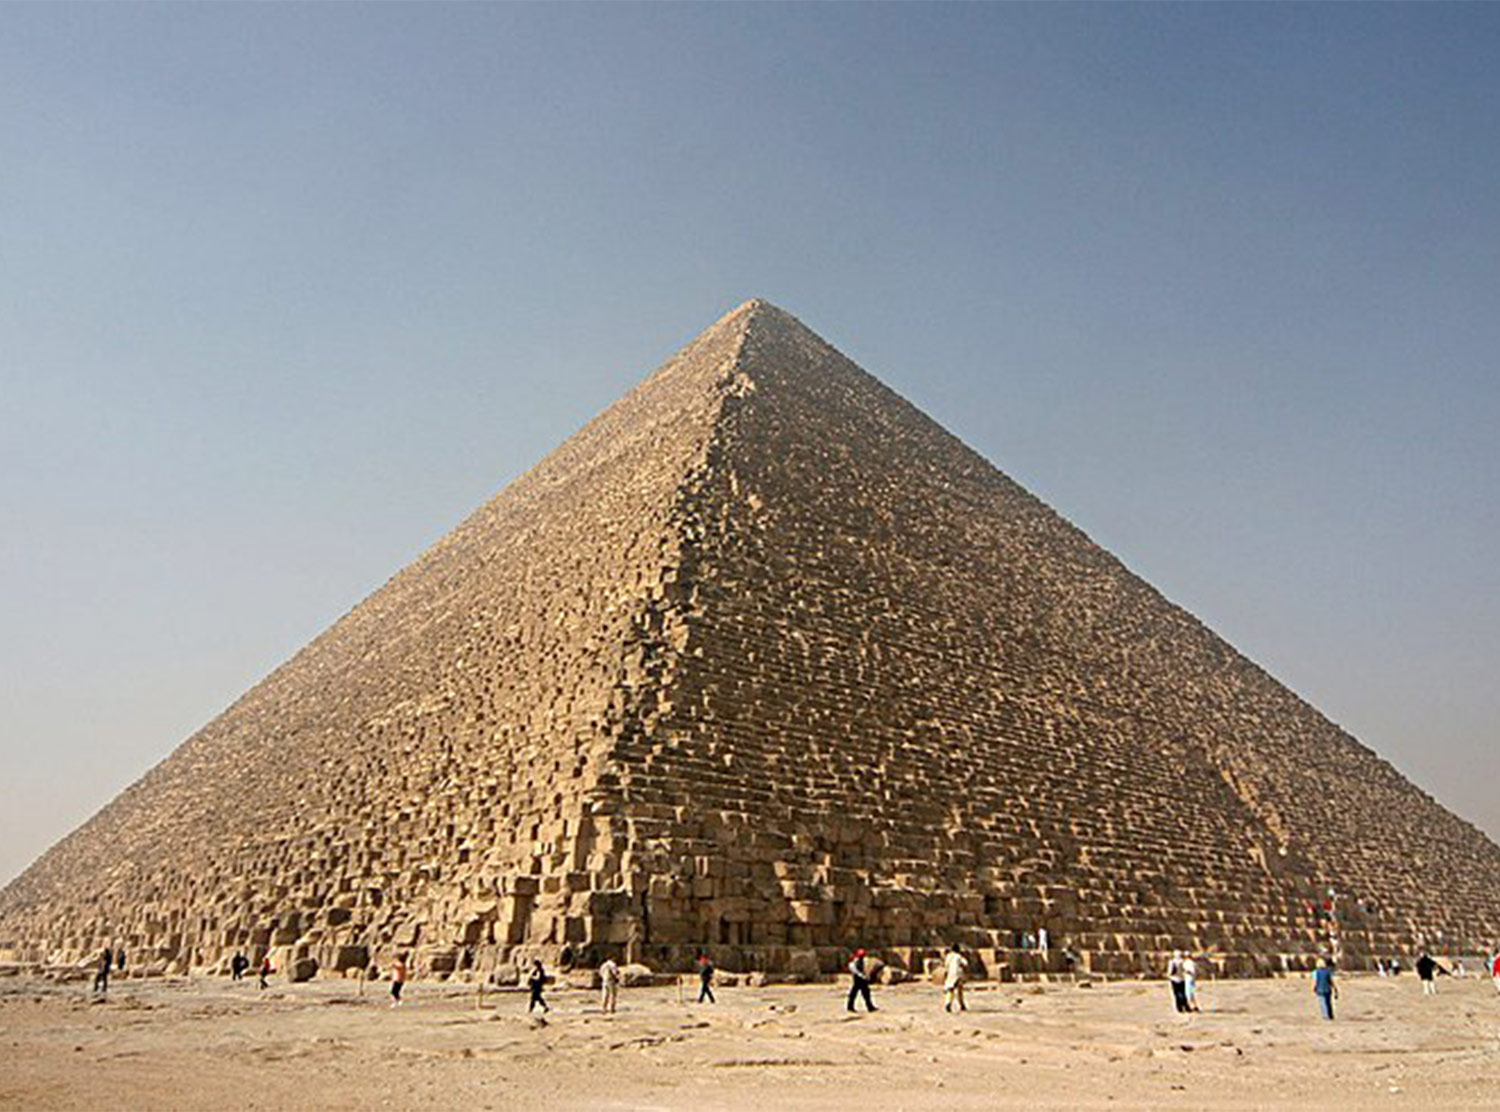 Pyramids of Giza, one of the ancient wonders of the world!